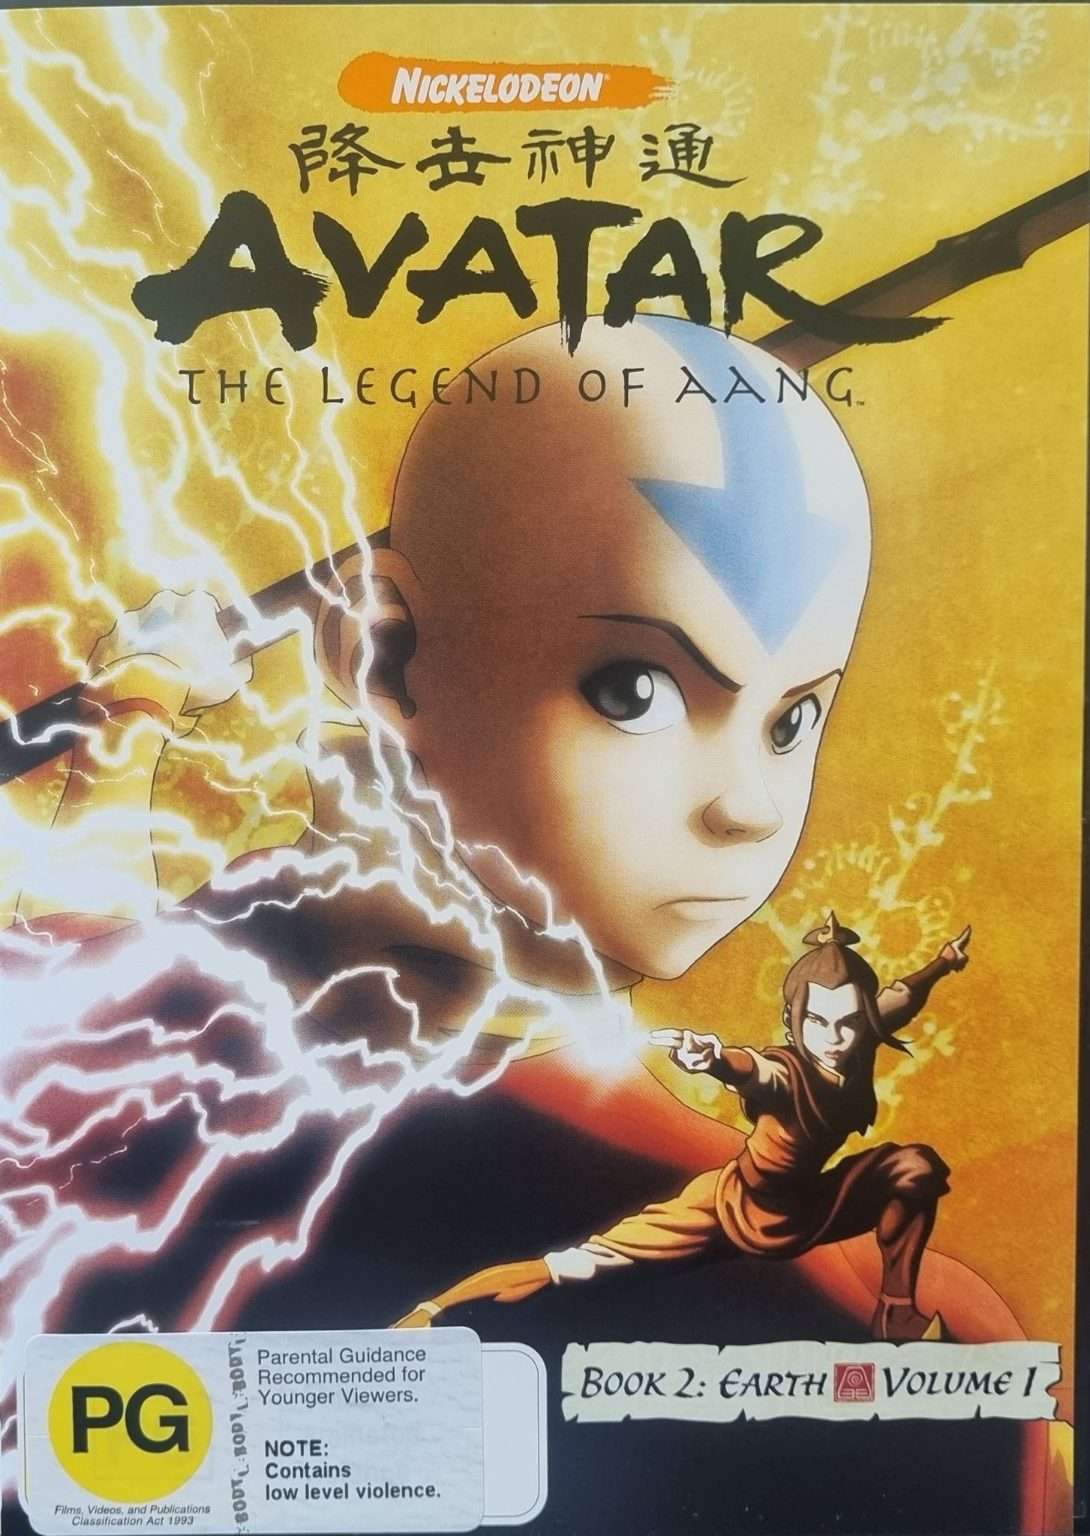 Avatar - The Legend of Aang - Book 2: Earth Volume 1